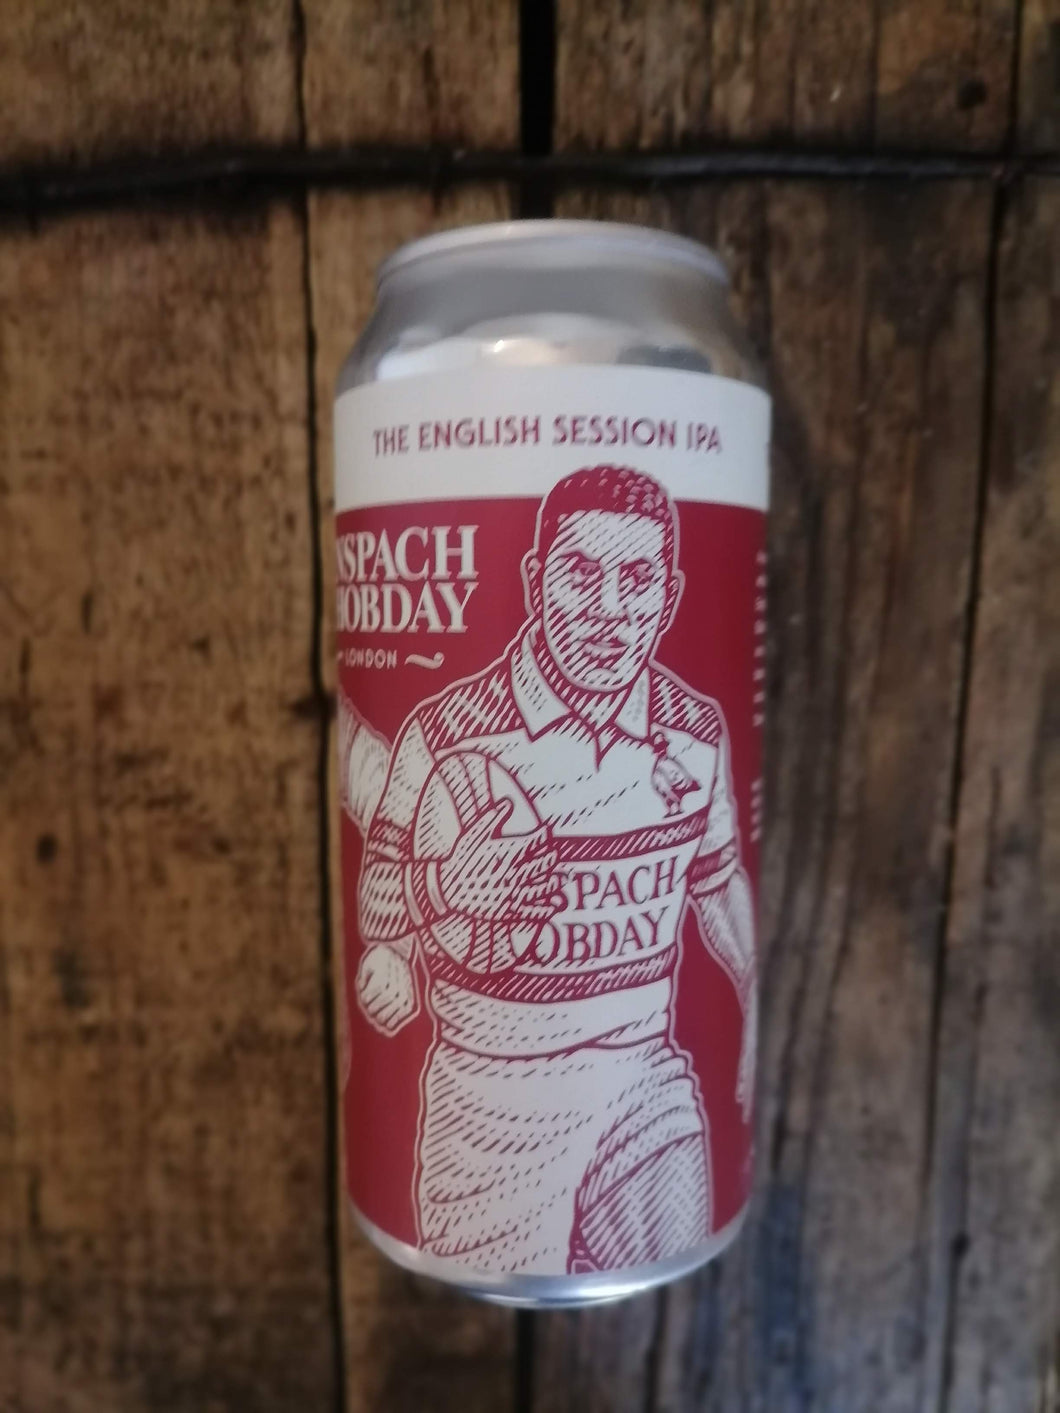 Anspach & Hobday The English Session IPA 4% (440ml can)